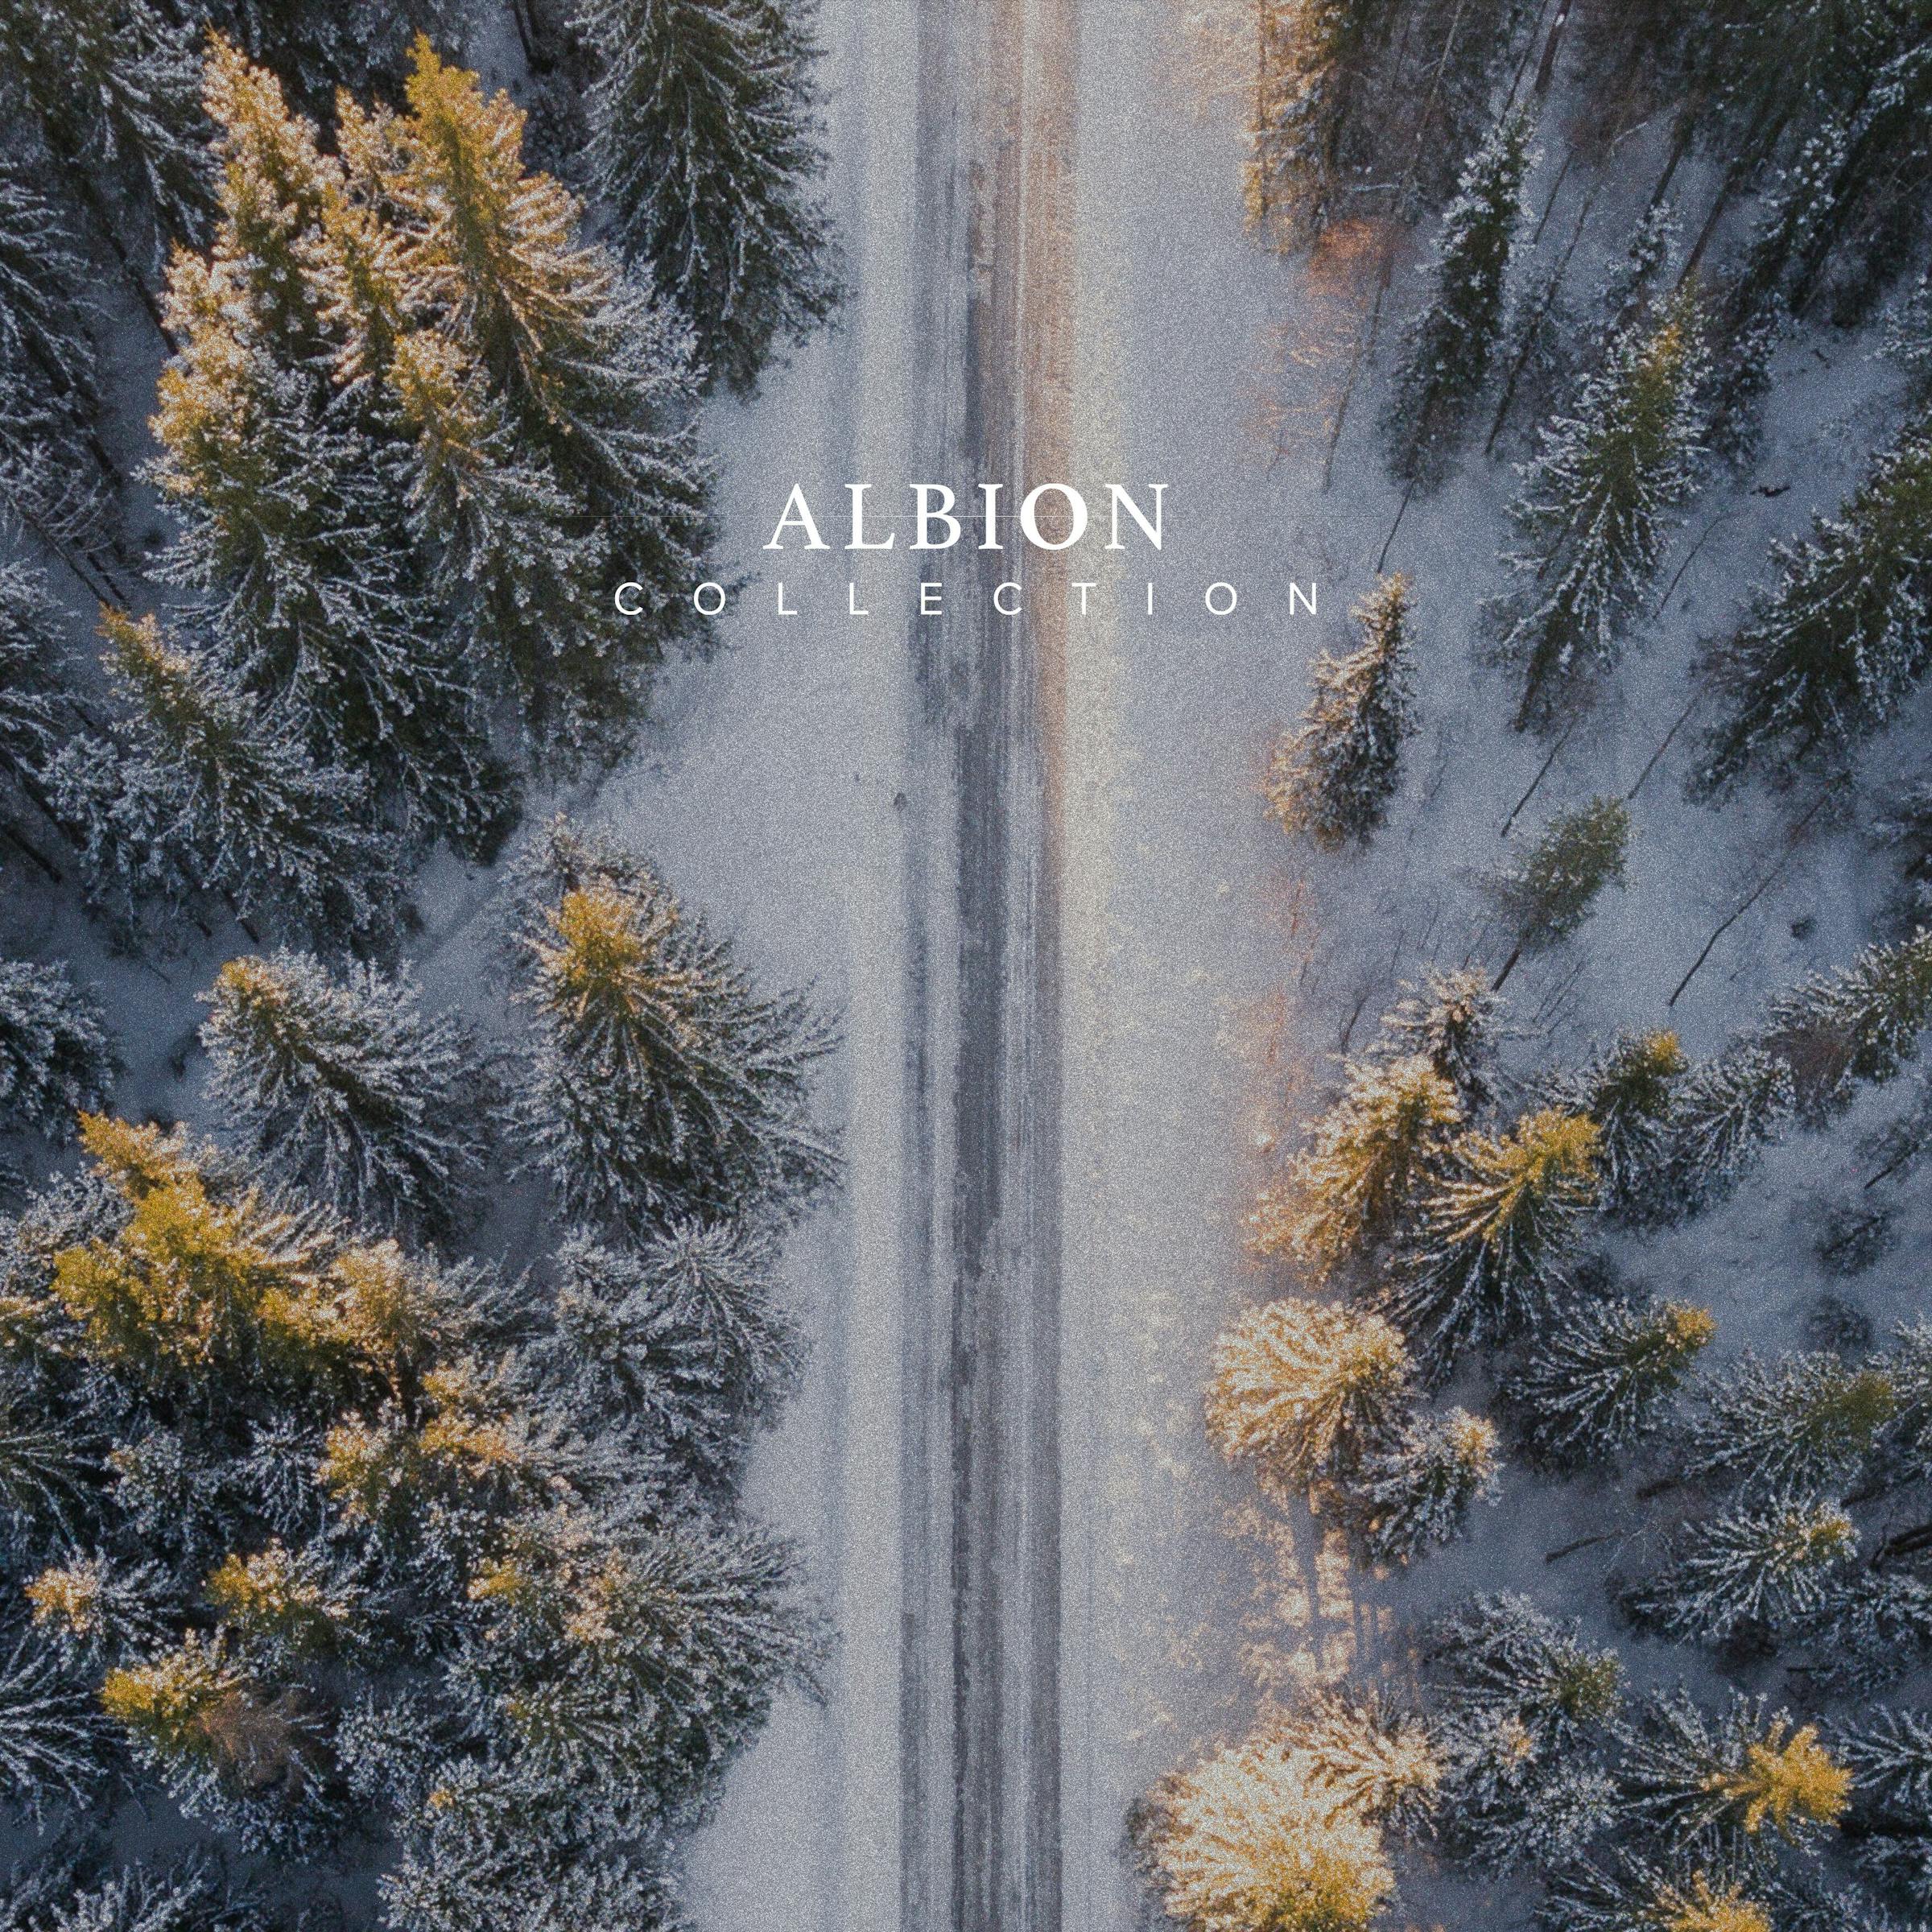 Albions product artwork